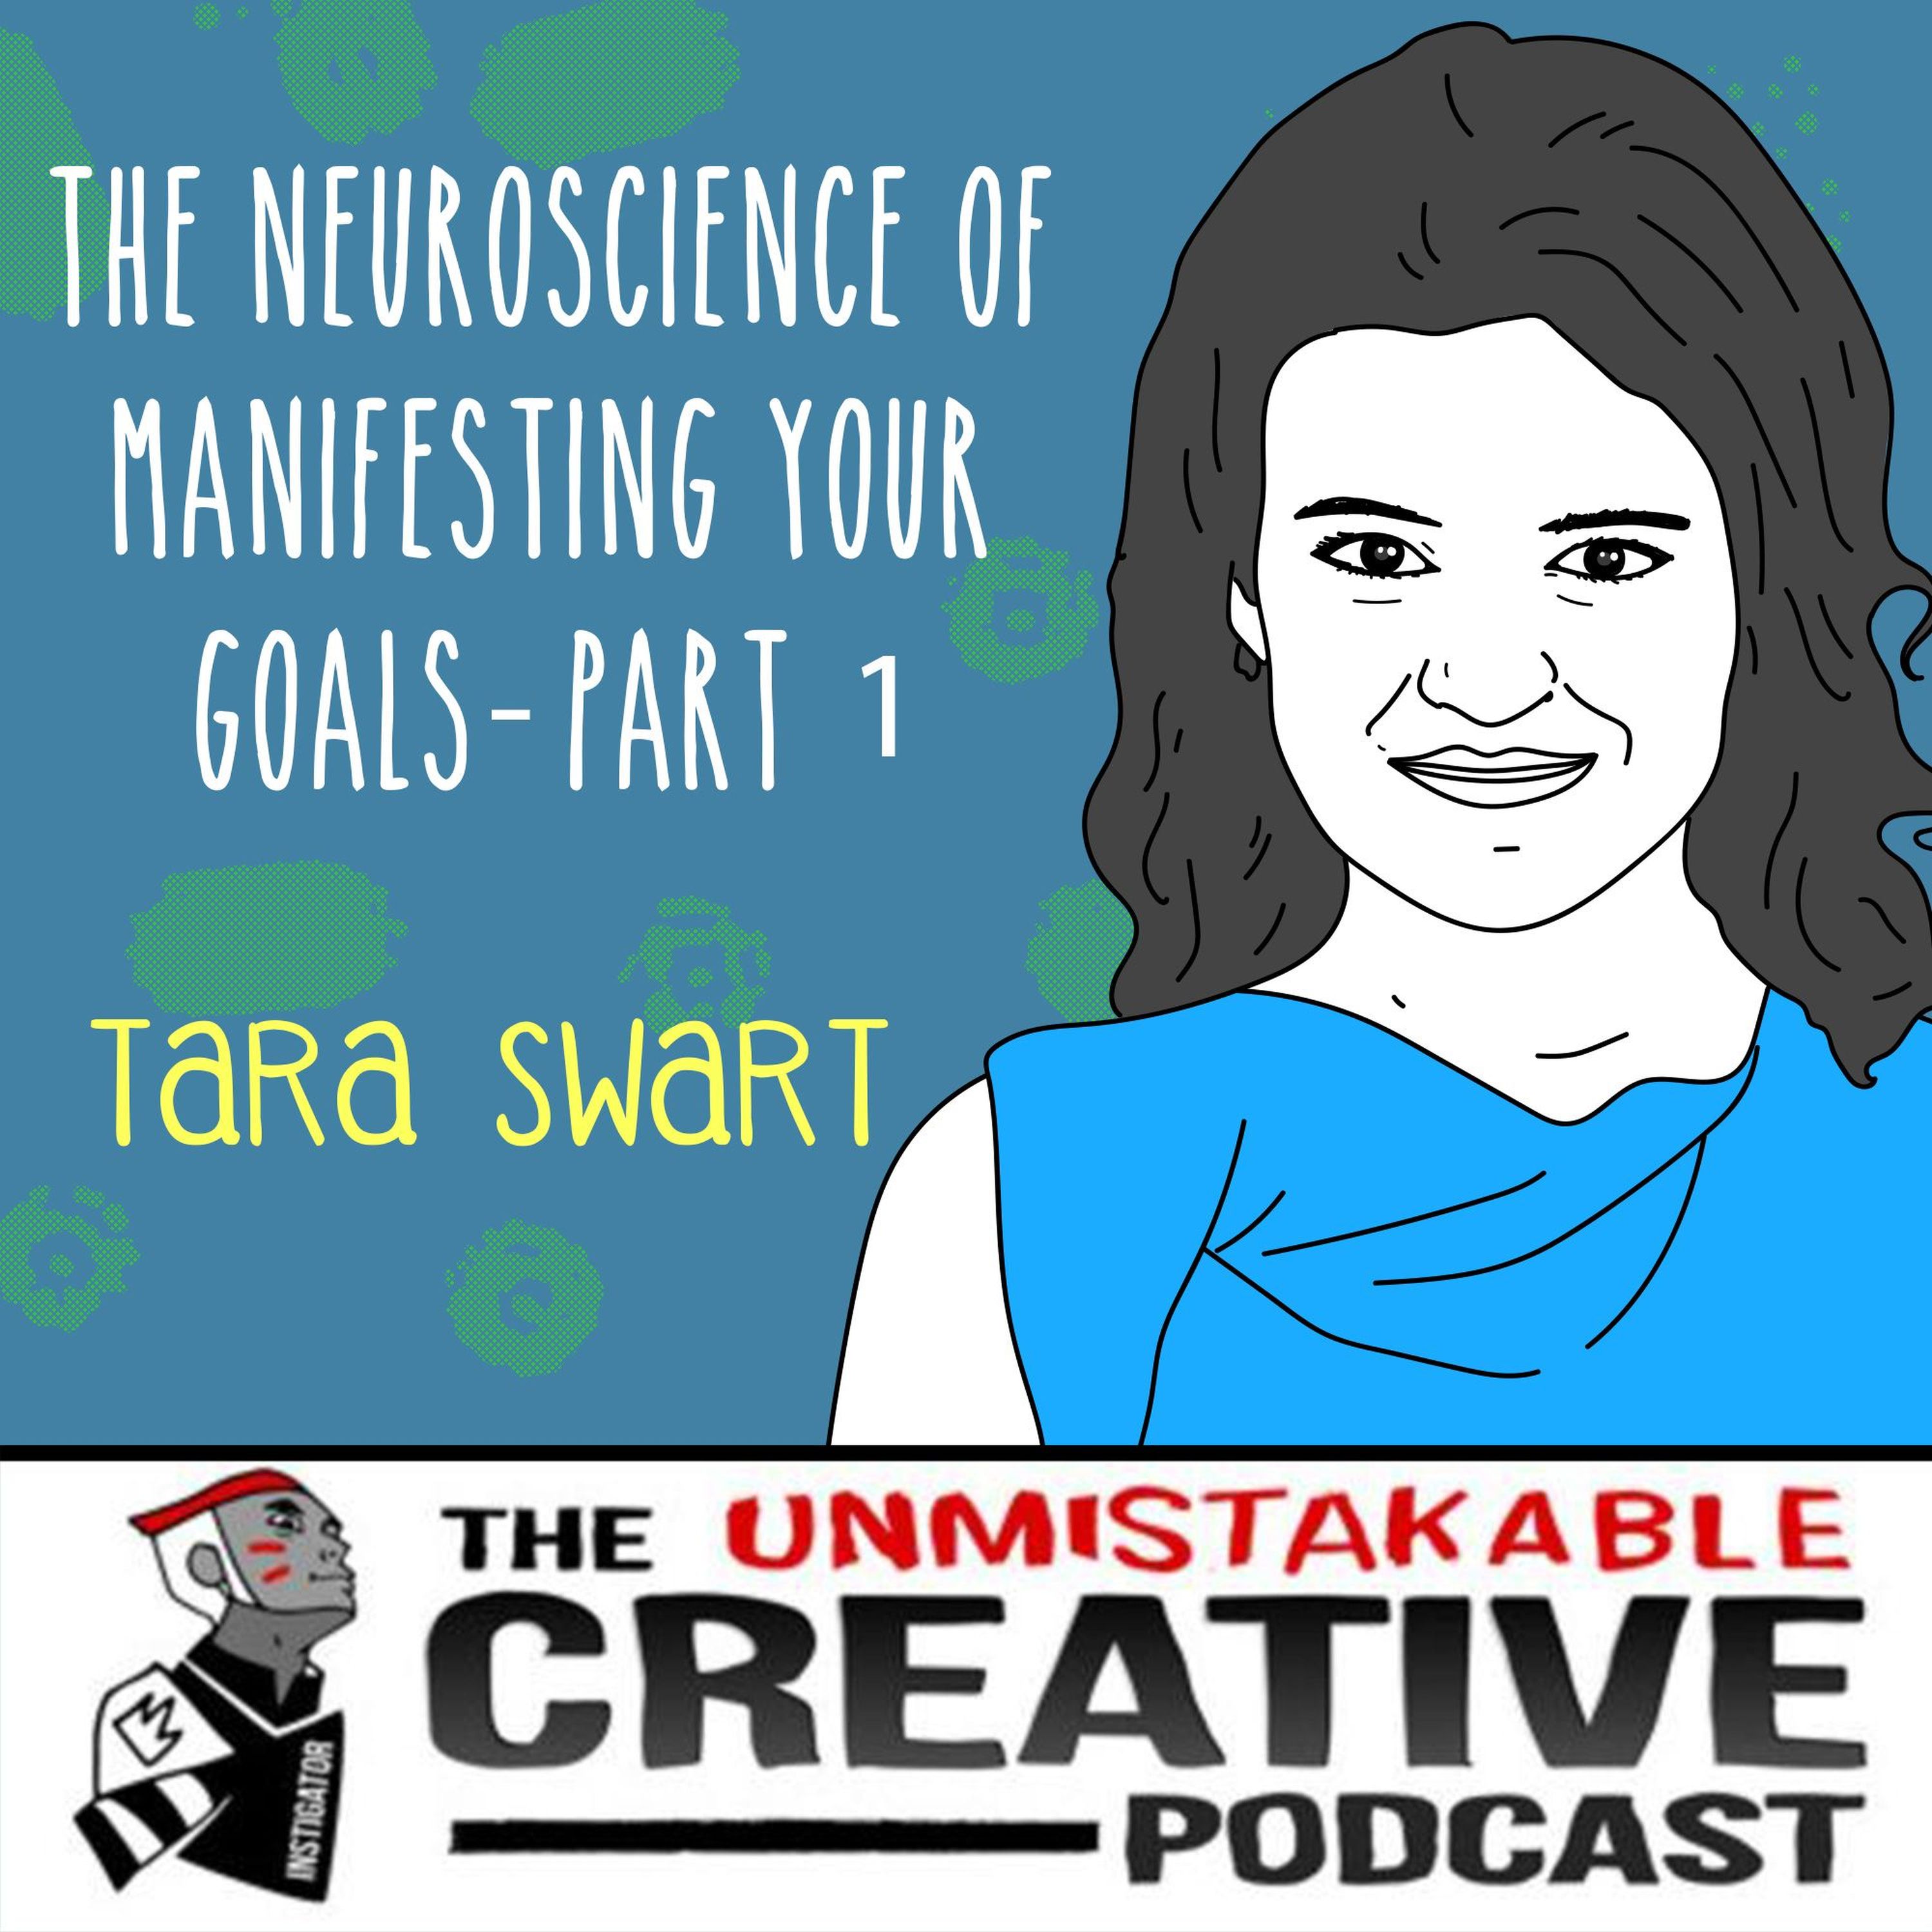 Unmistakable Classics: Tara Swart | The Neuroscience of Manifesting Your Goals - Part 1 Image